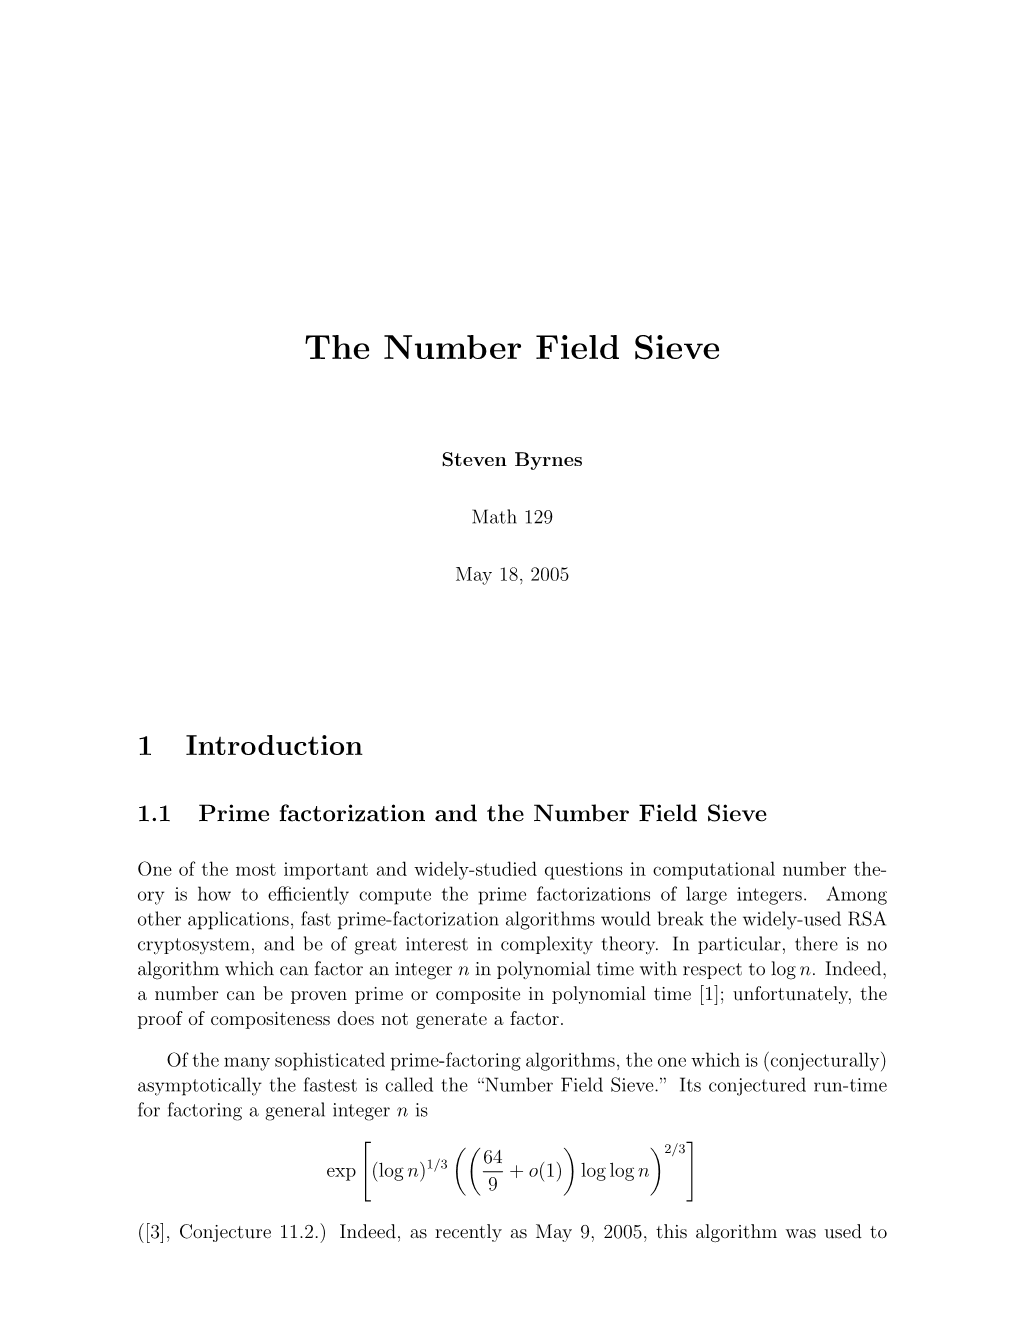 The Number Field Sieve